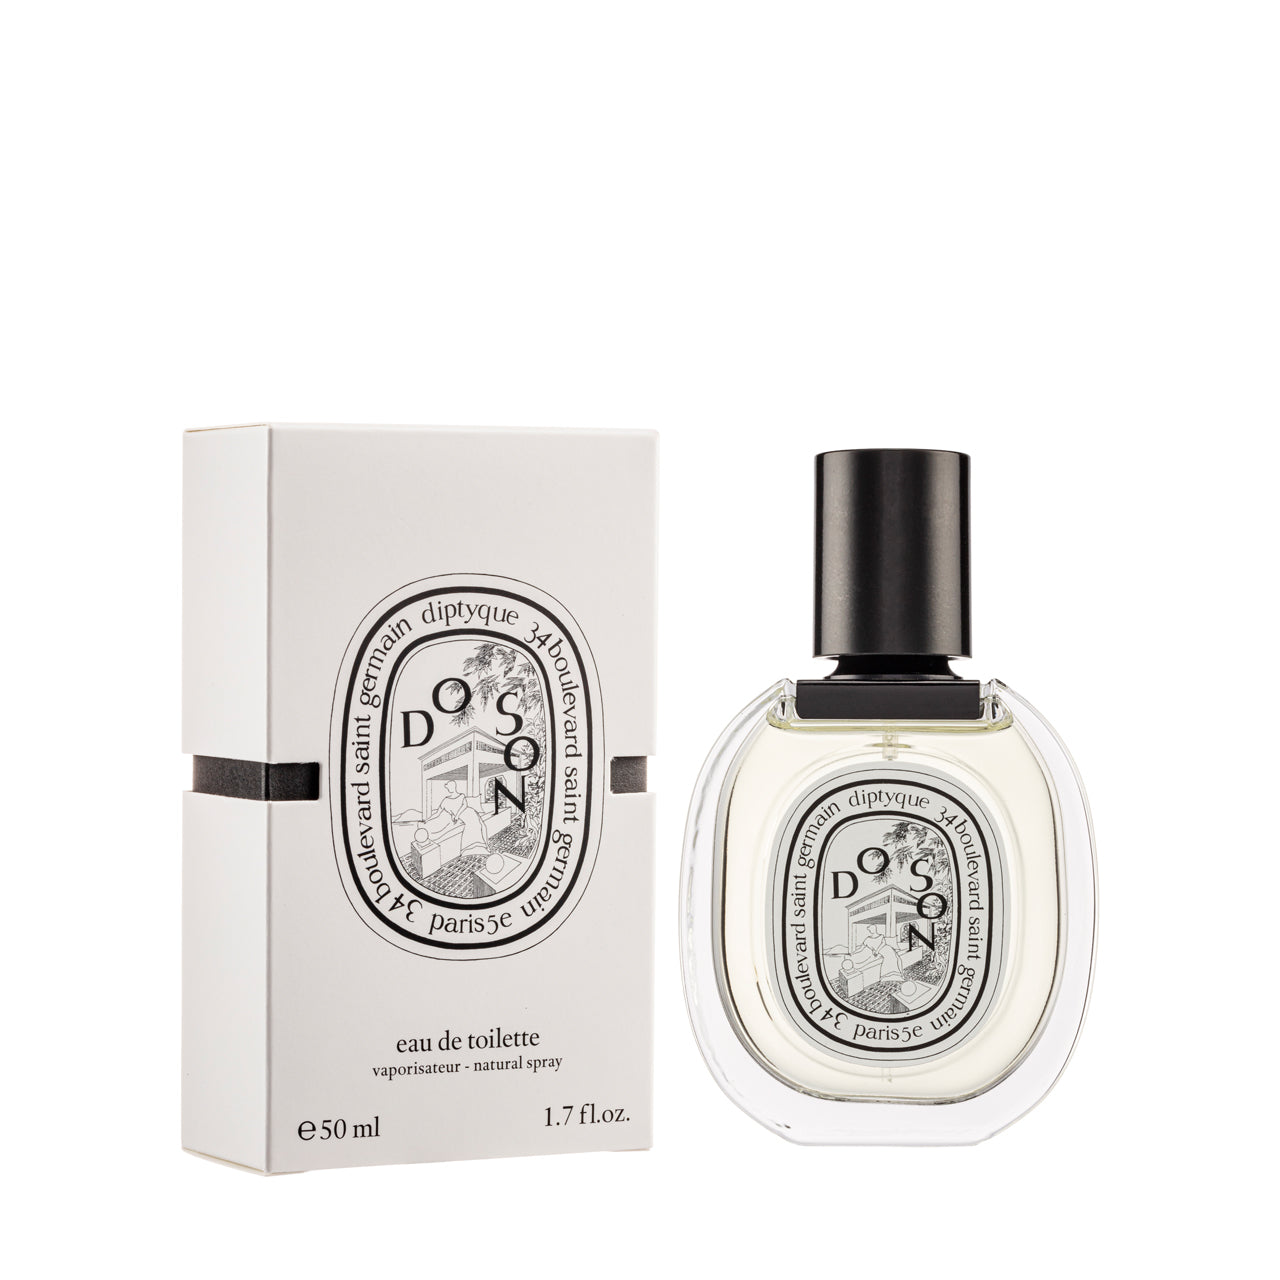 Do Son inspired by Diptyque - The Misk Shoppe